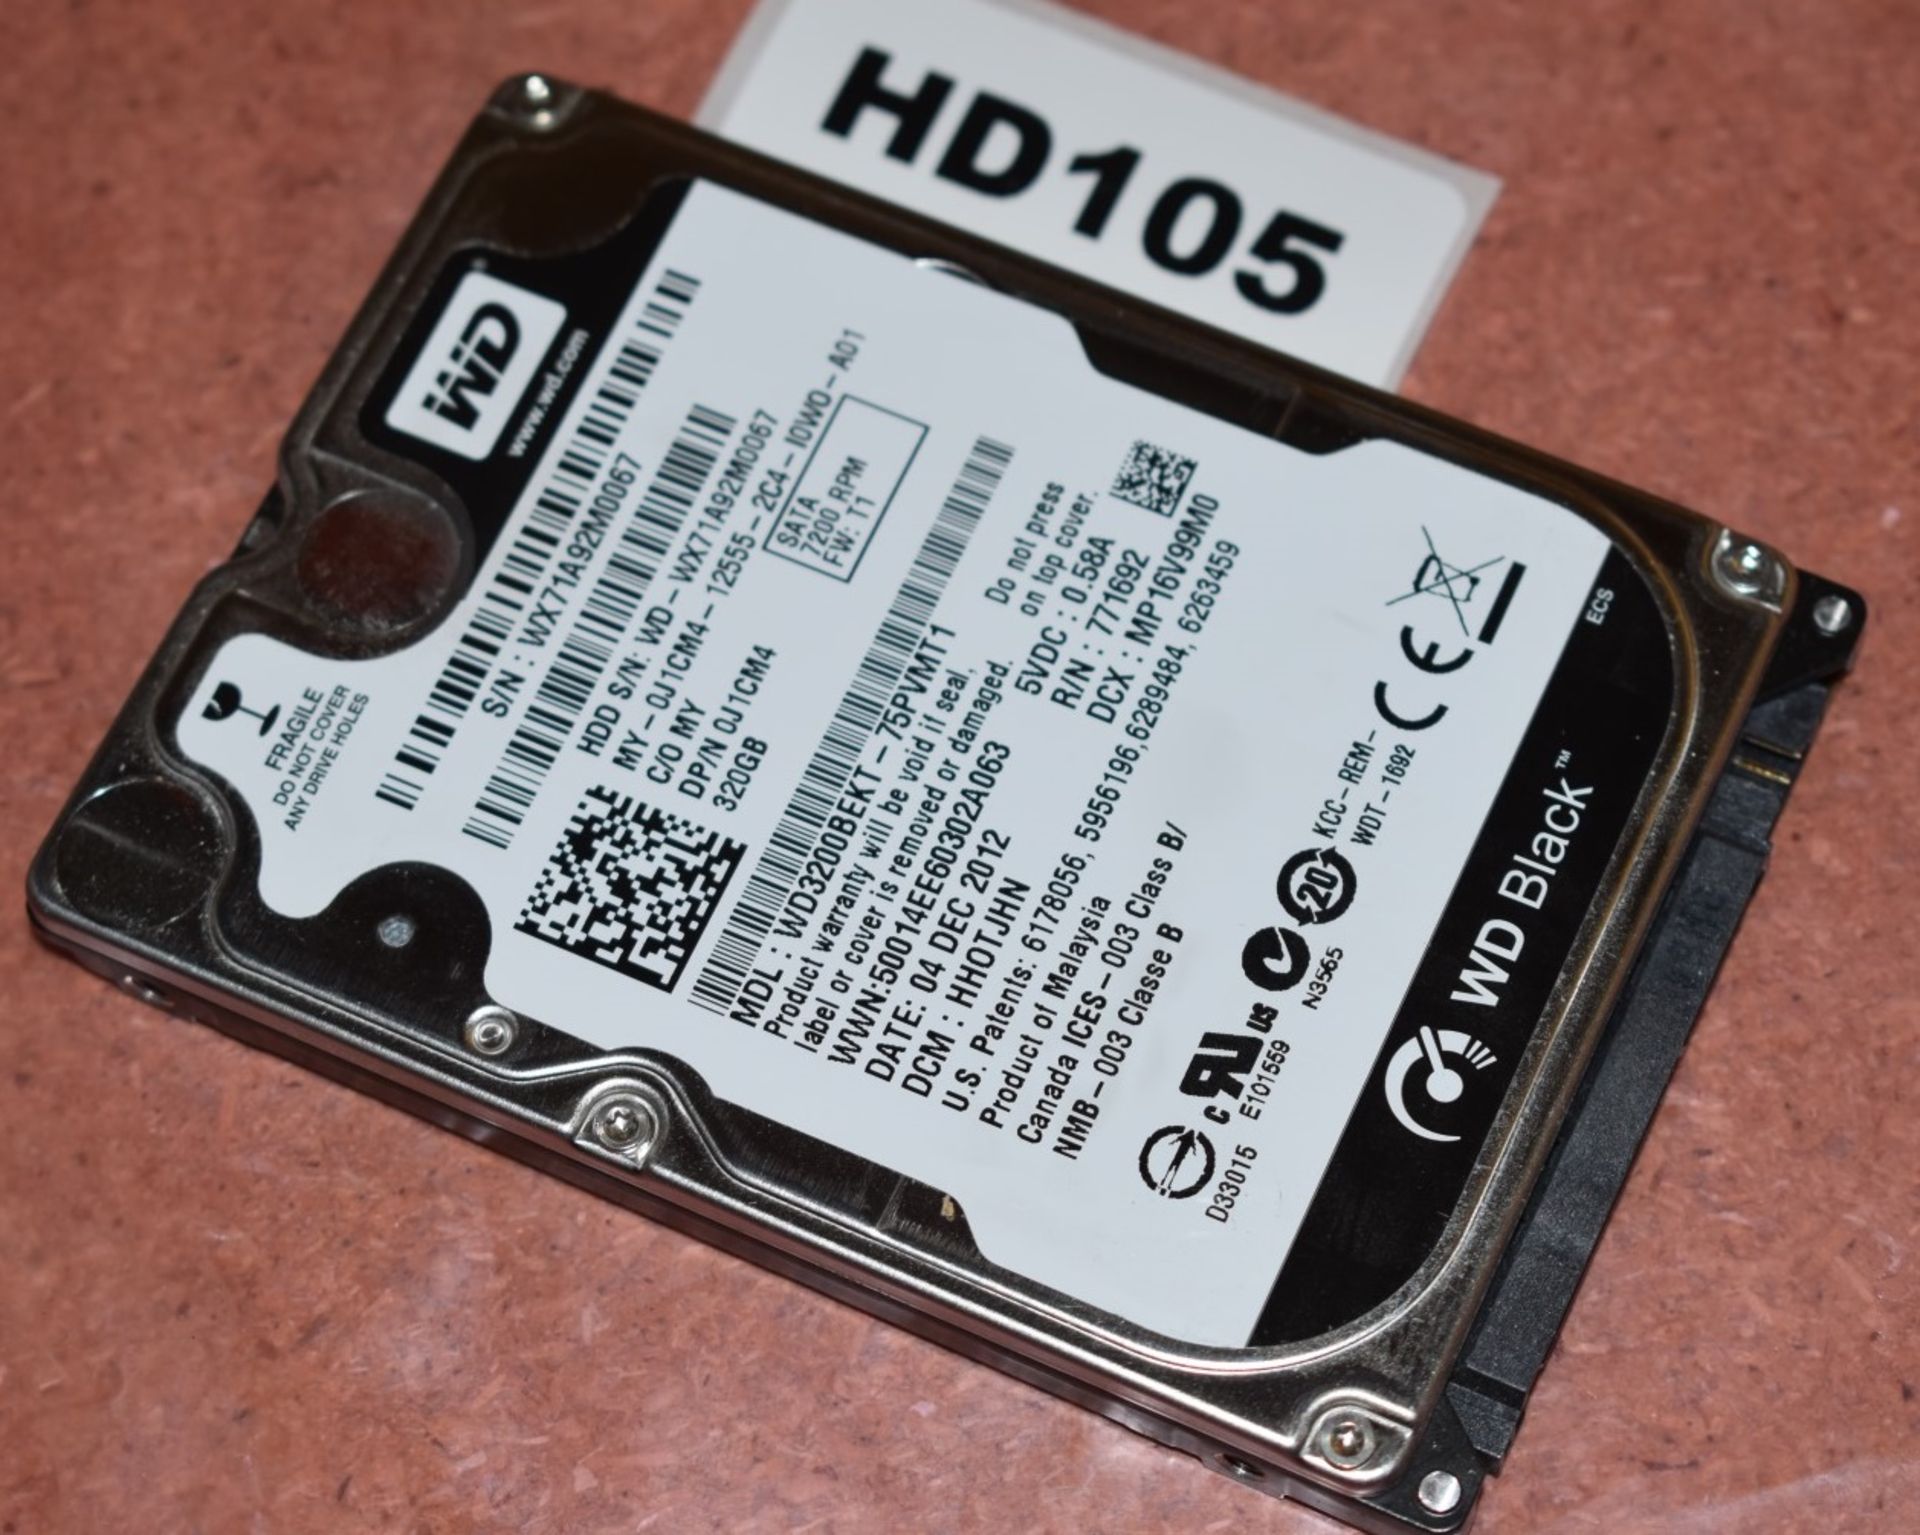 4 x Western Digital 320gb Black 2.5 Inch SATA Hard Drives - Tested and Formatted - HD104/105/106/112 - Image 4 of 4